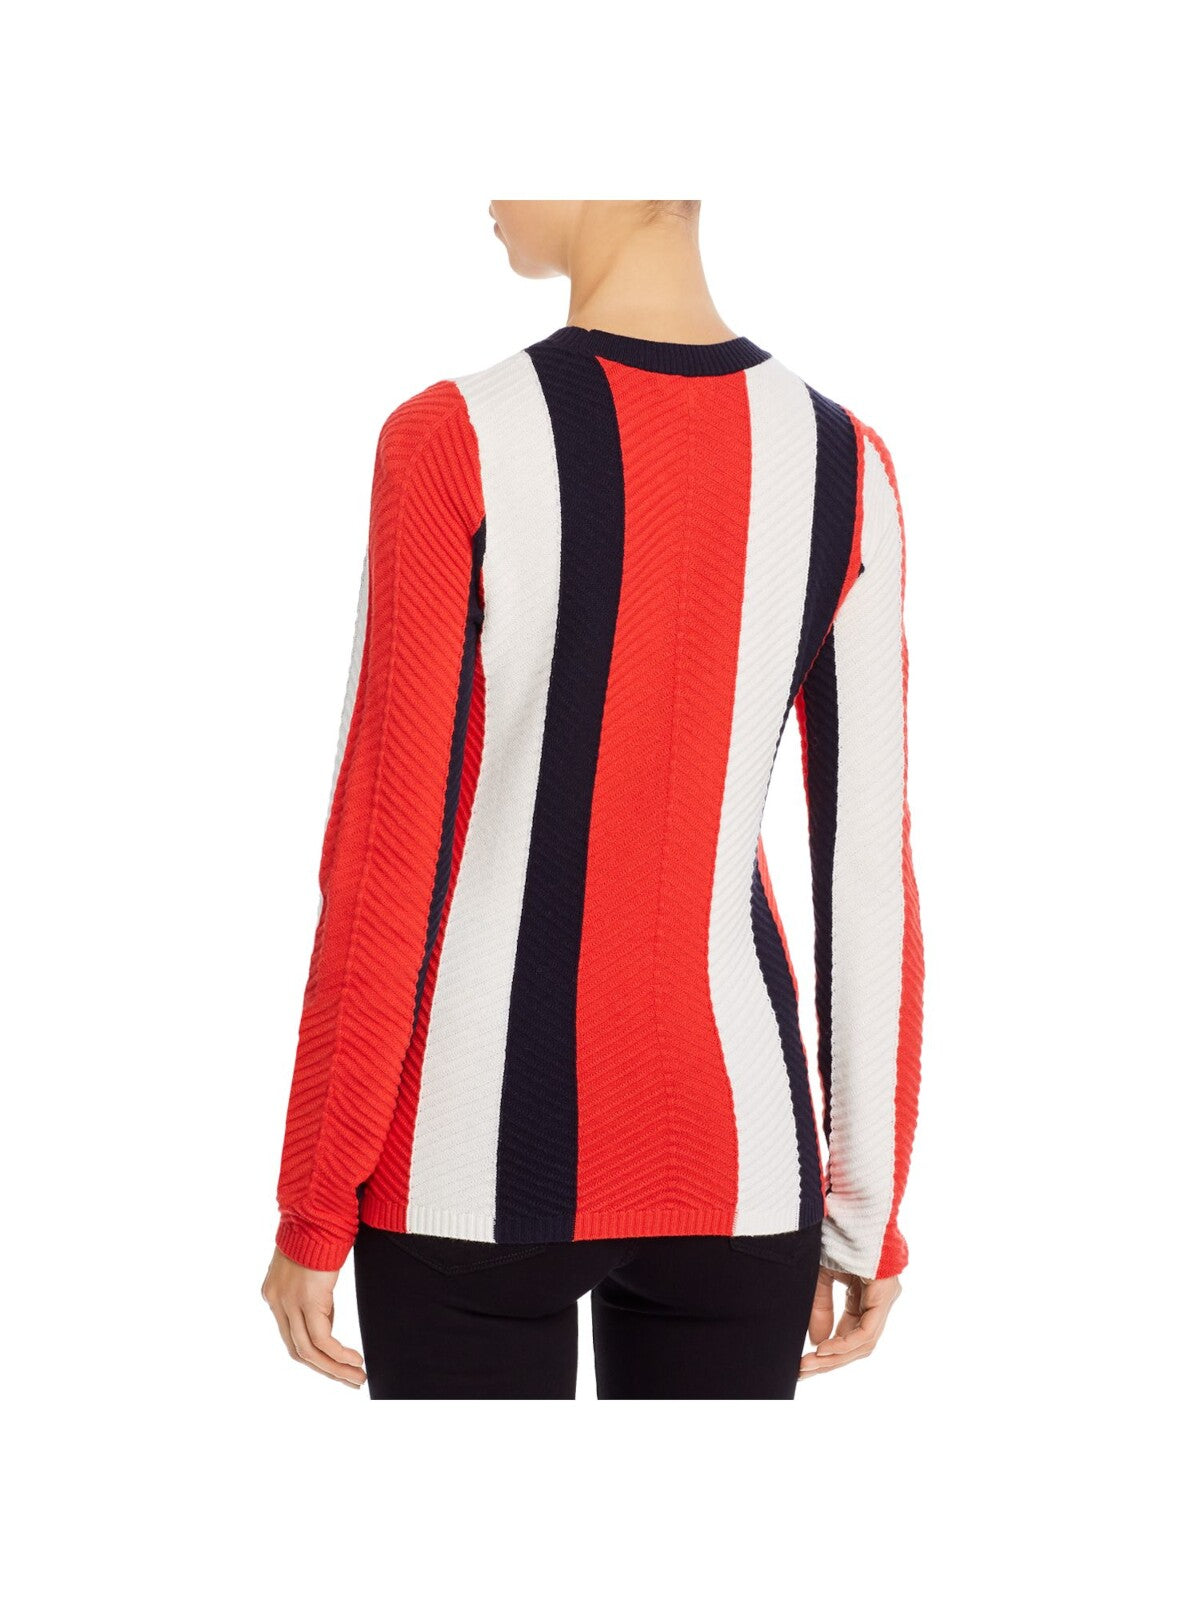 MINNIEROSE Womens Red Stretch Ribbed Striped Long Sleeve Crew Neck Sweater S